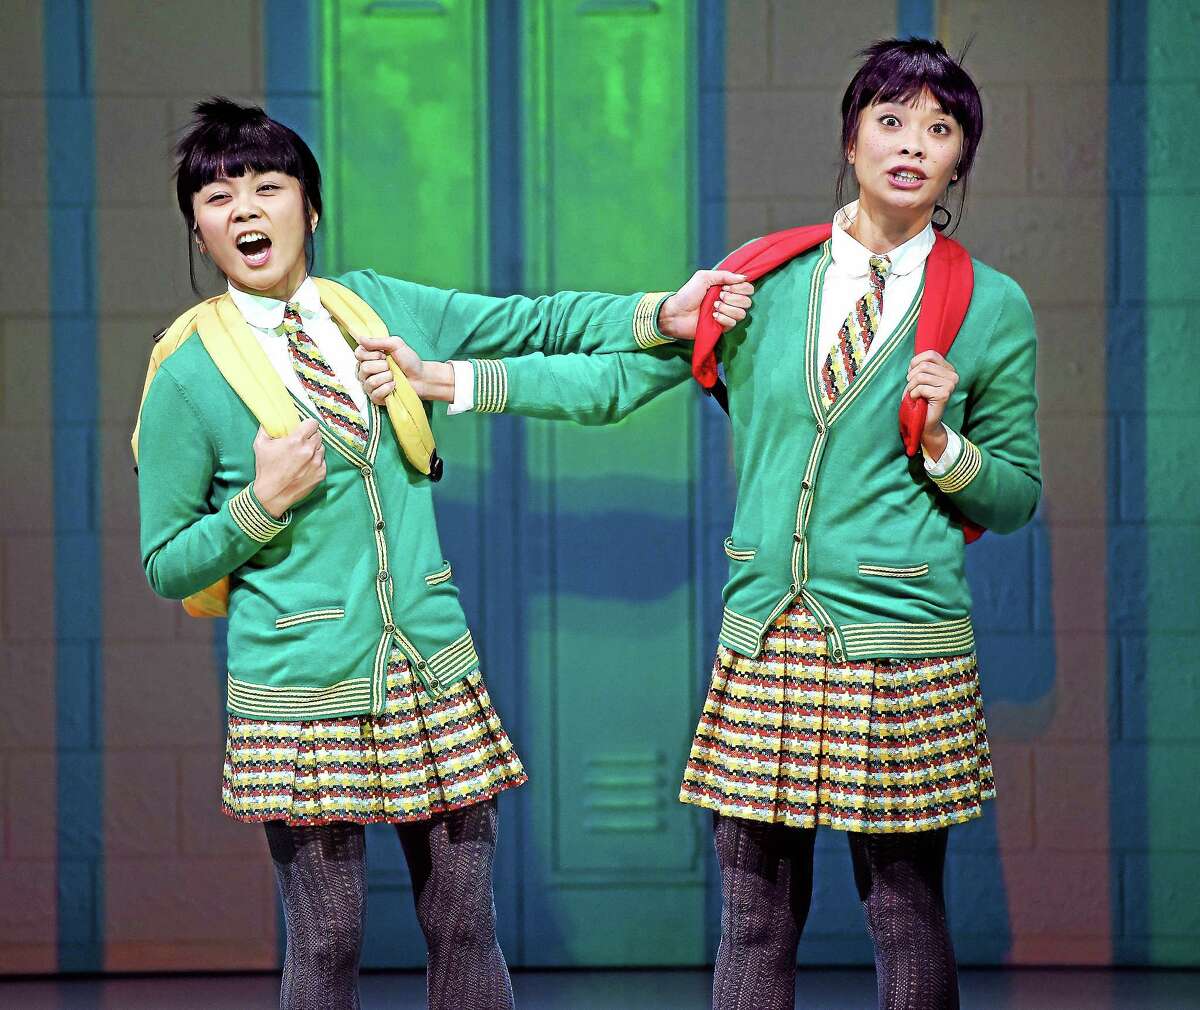 Teresa Avia Lim, left, and Tiffany Villarin as twin sisters rehearse a scene from “peerless” at the Yale Repertory Theatre in New Haven.